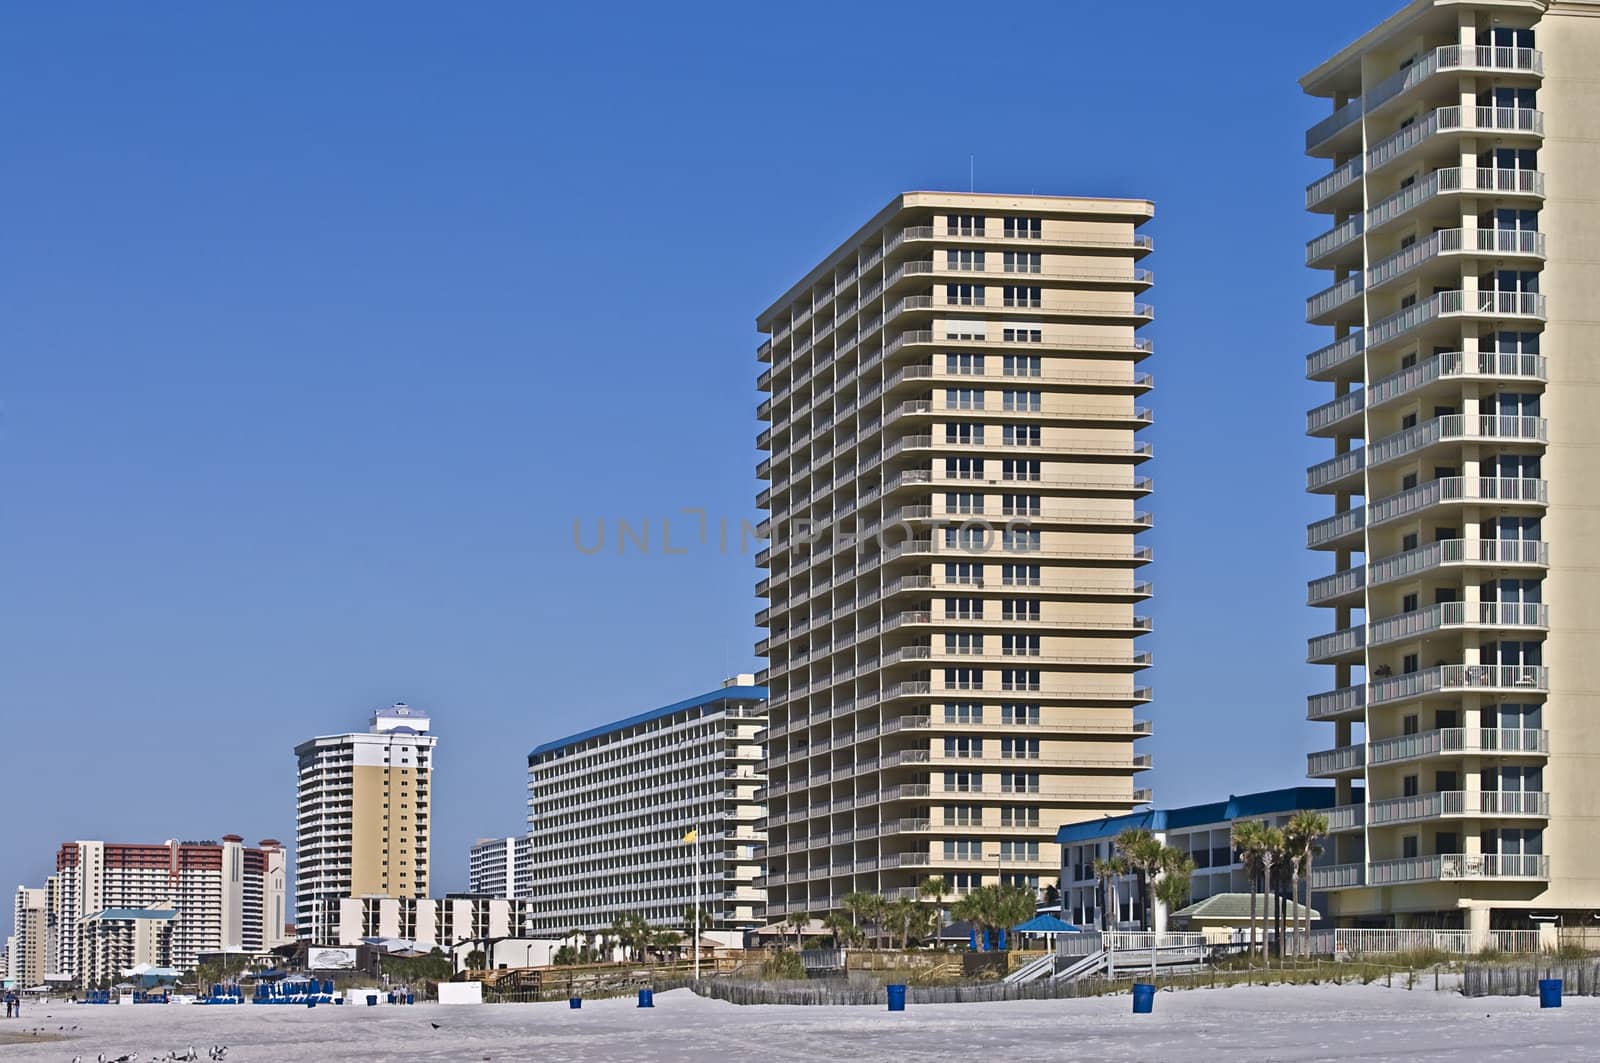 Buildings Along the Beach by Noonie